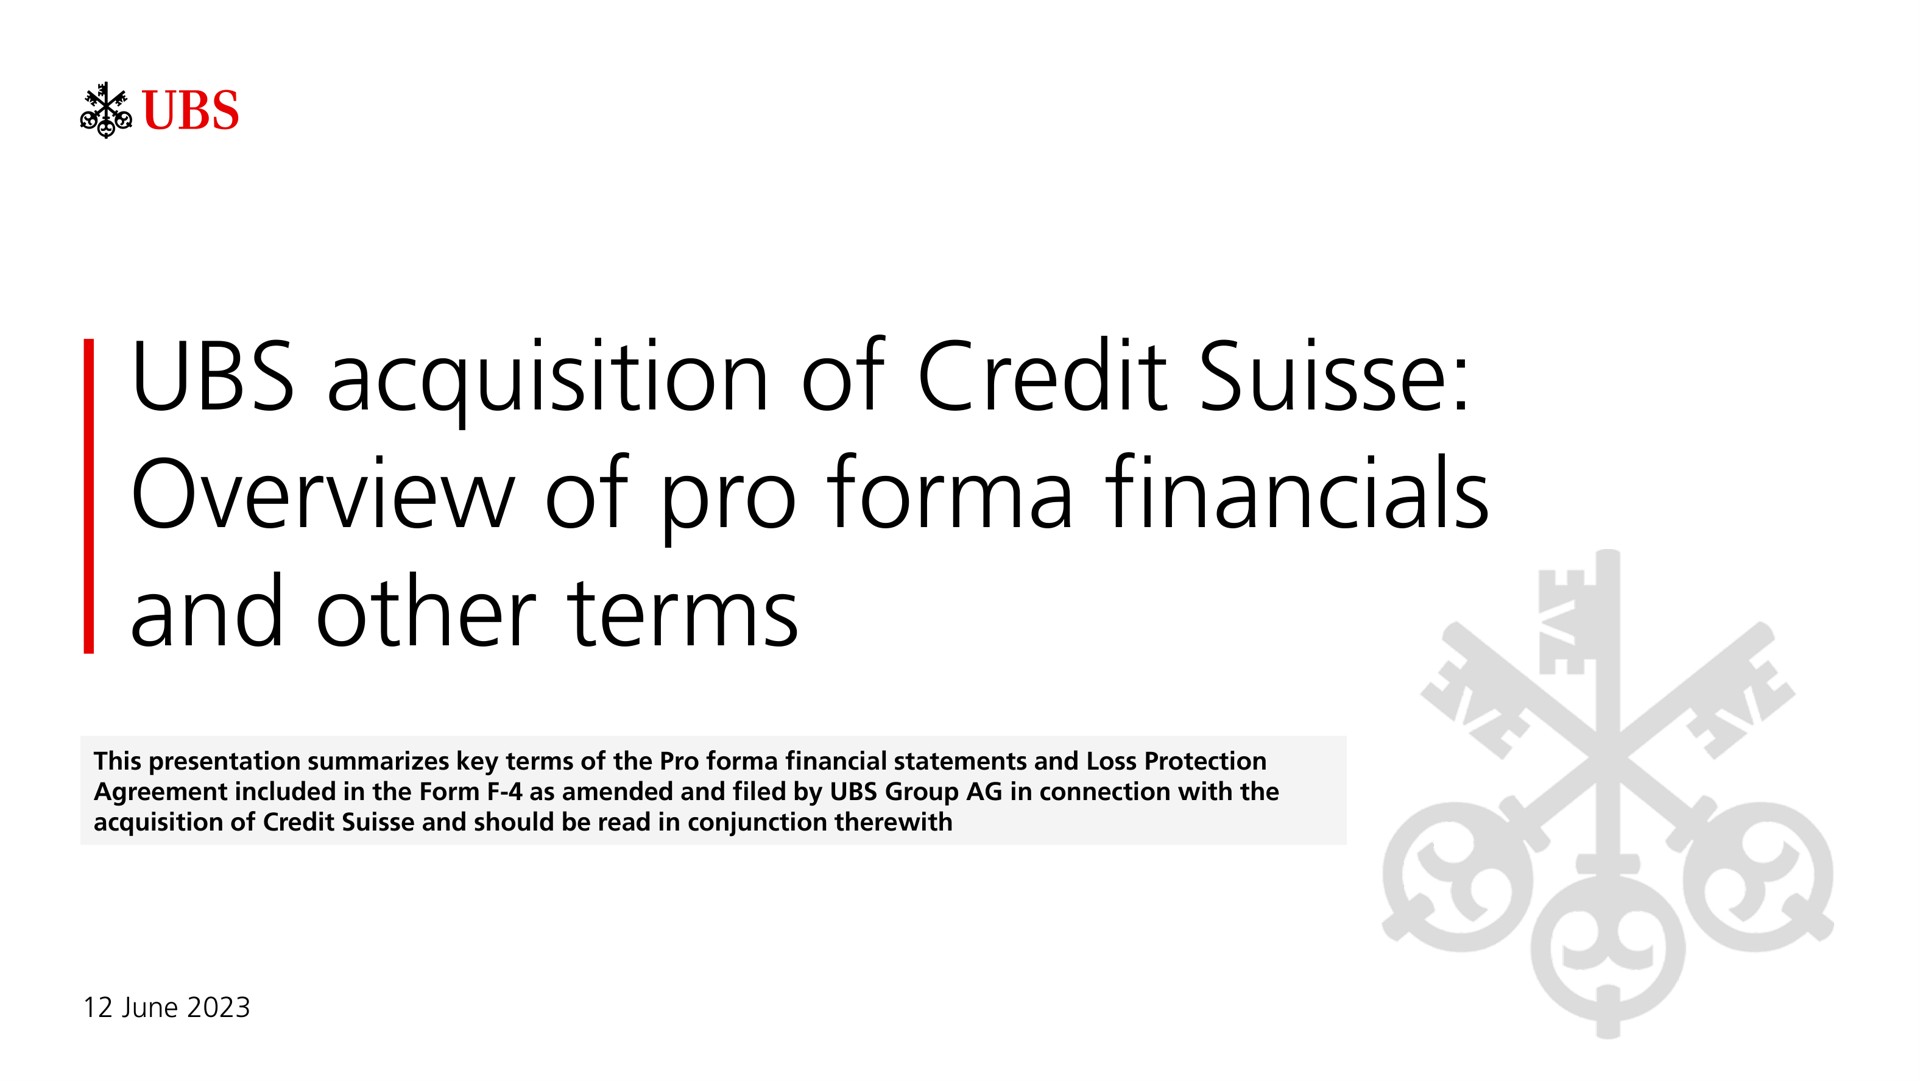 acquisition of credit overview of pro and other terms | UBS